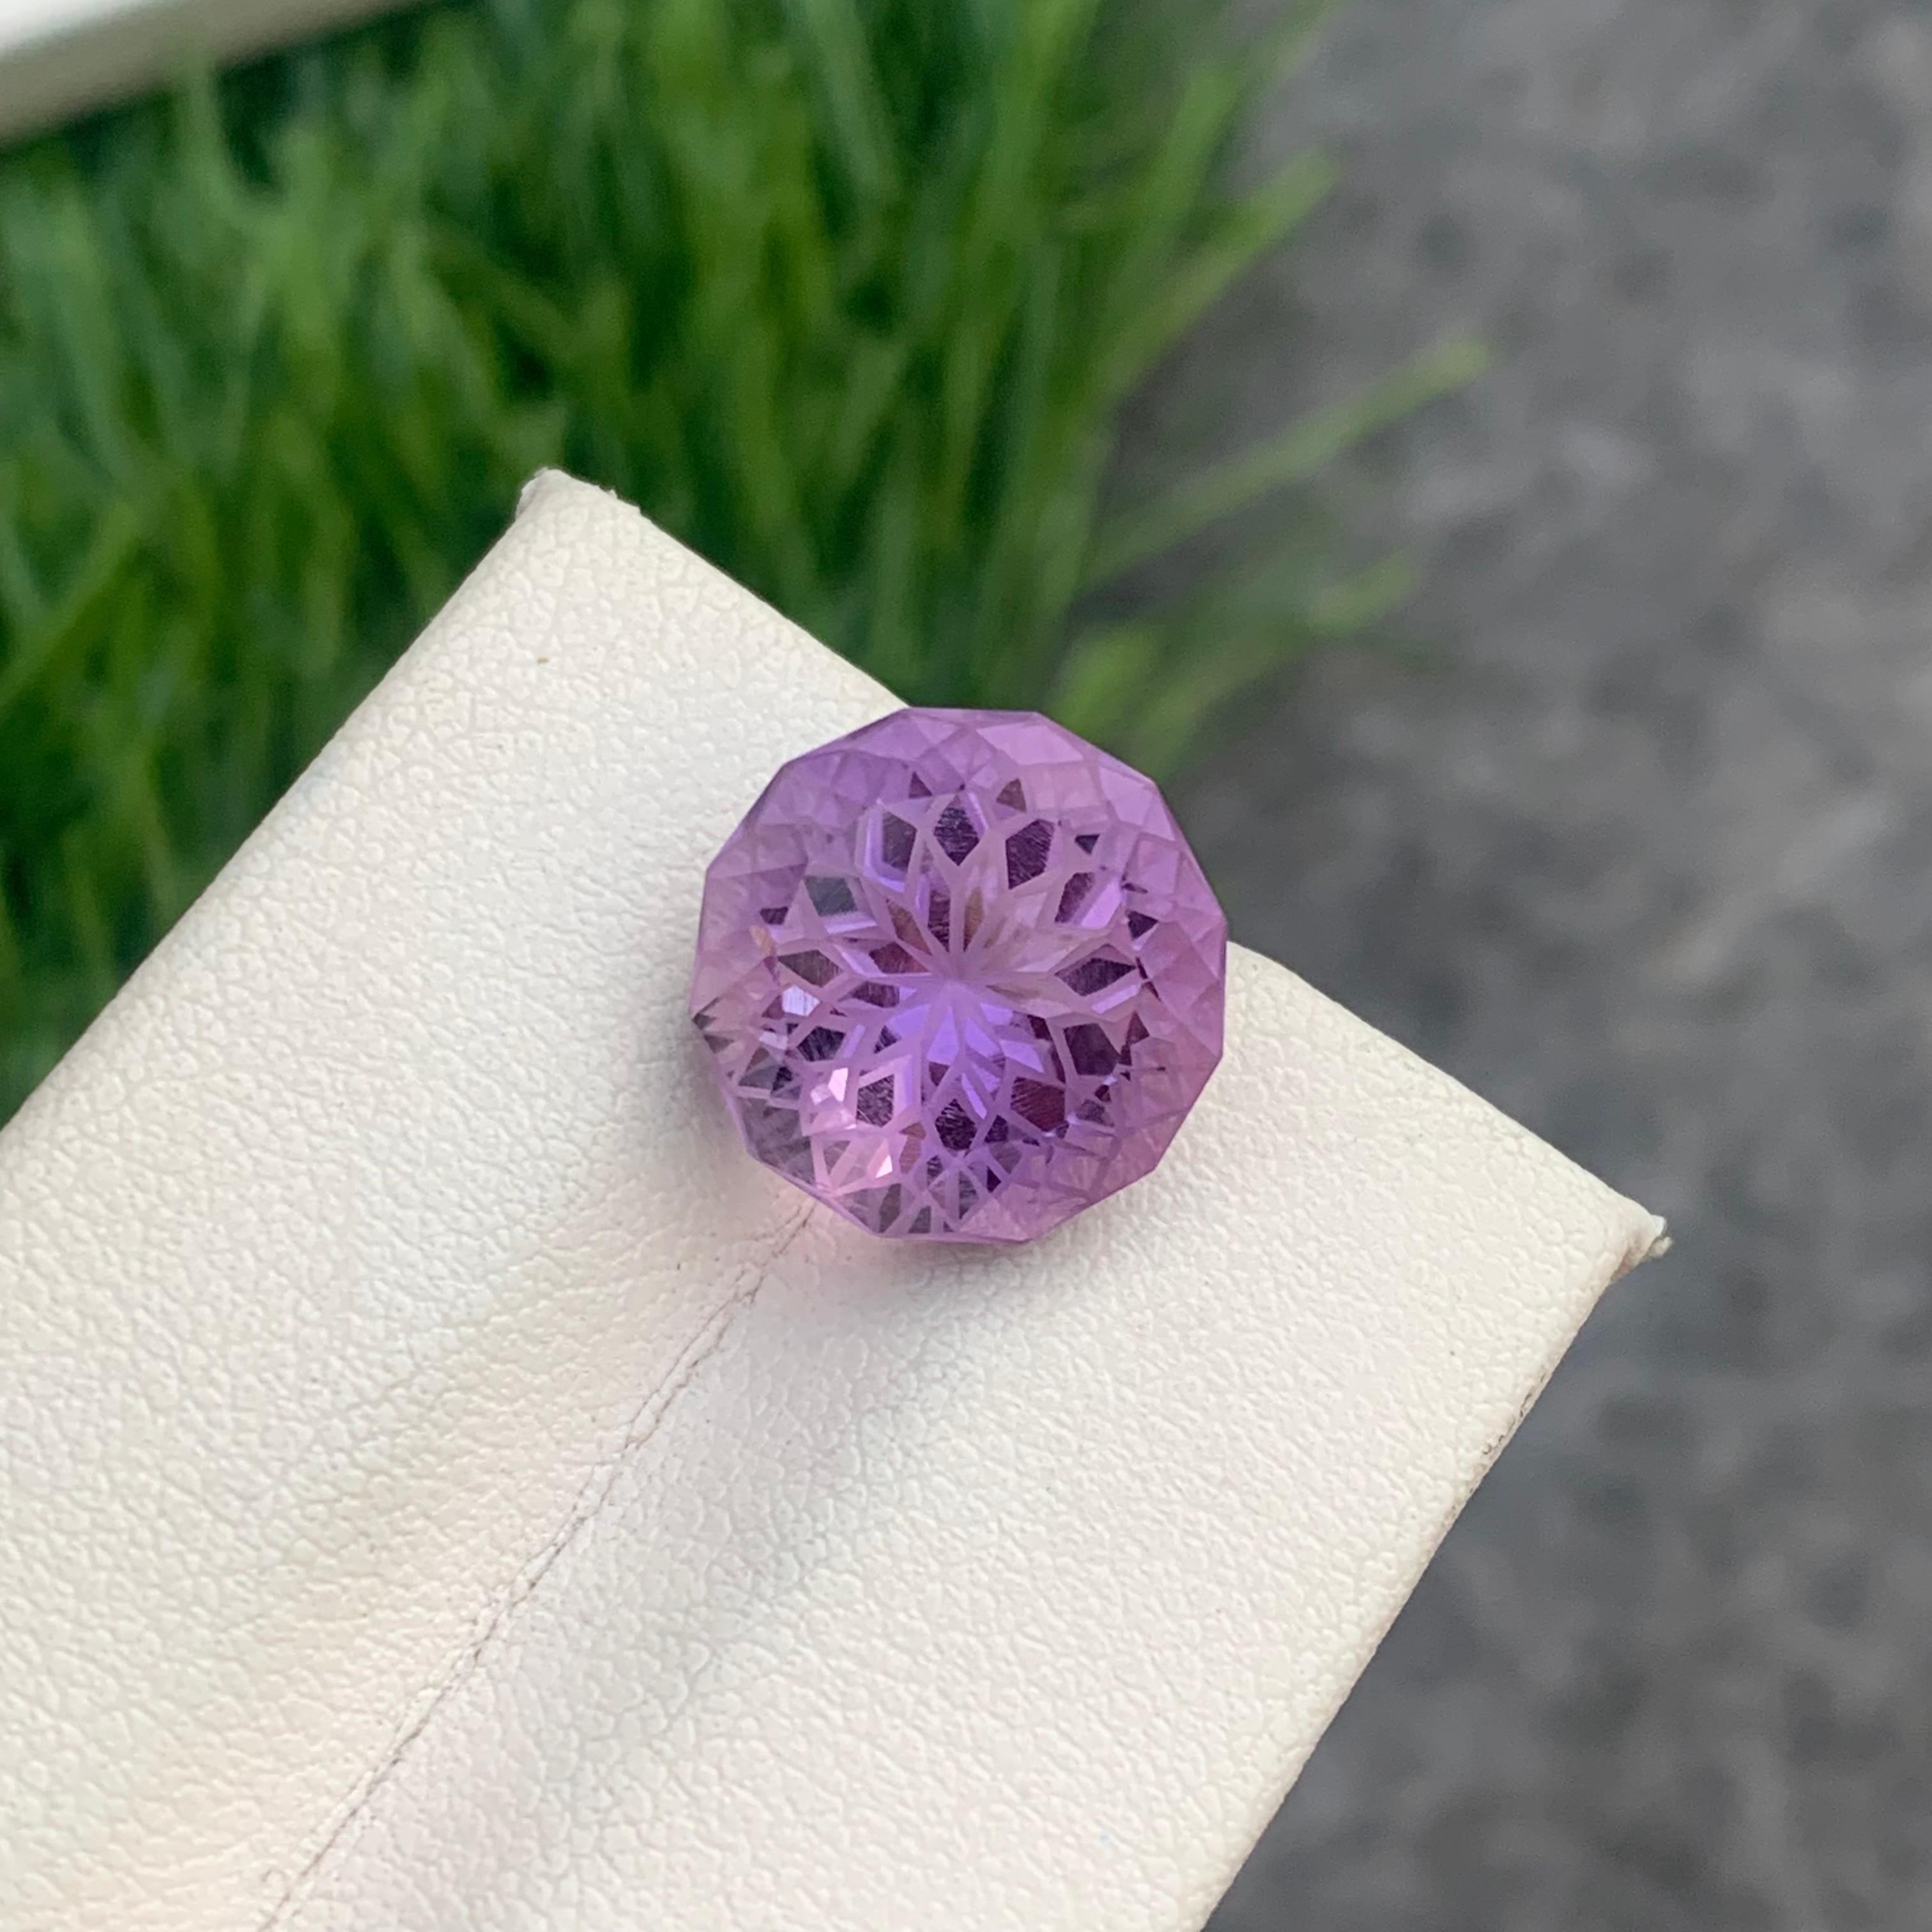 8.50 Carat Gorgeous Natural Loose Round Flower Cut Amethyst Ring Gem from Brazil For Sale 2